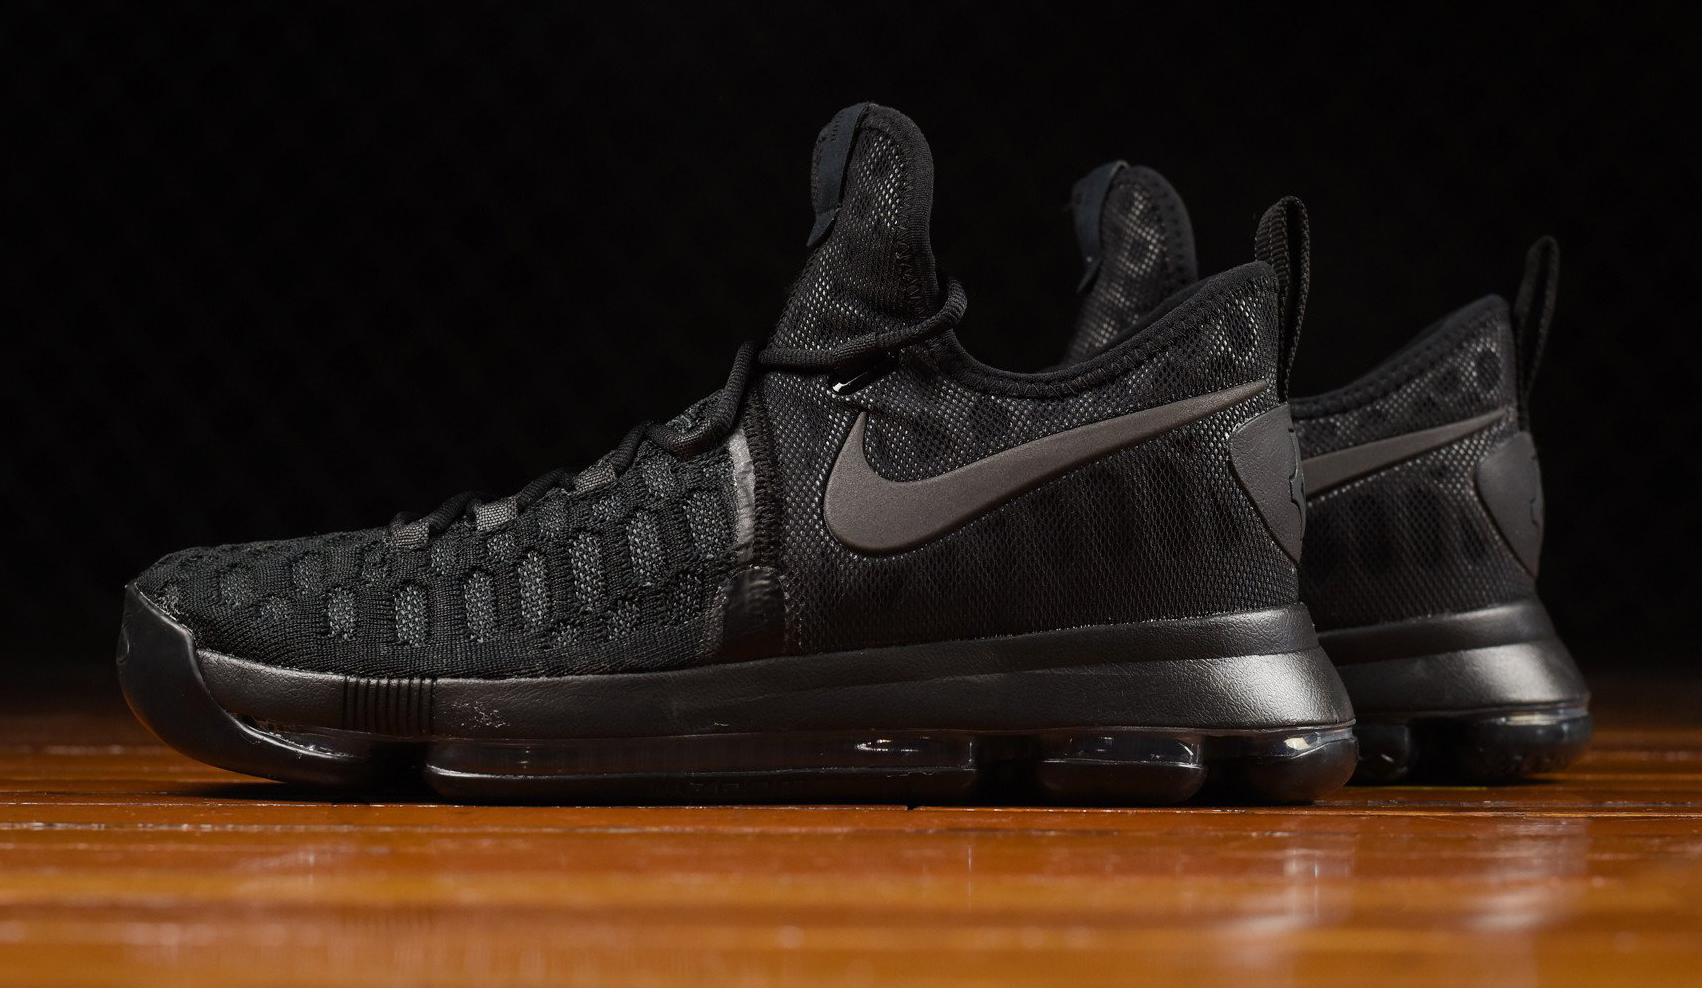 kd shoes all black